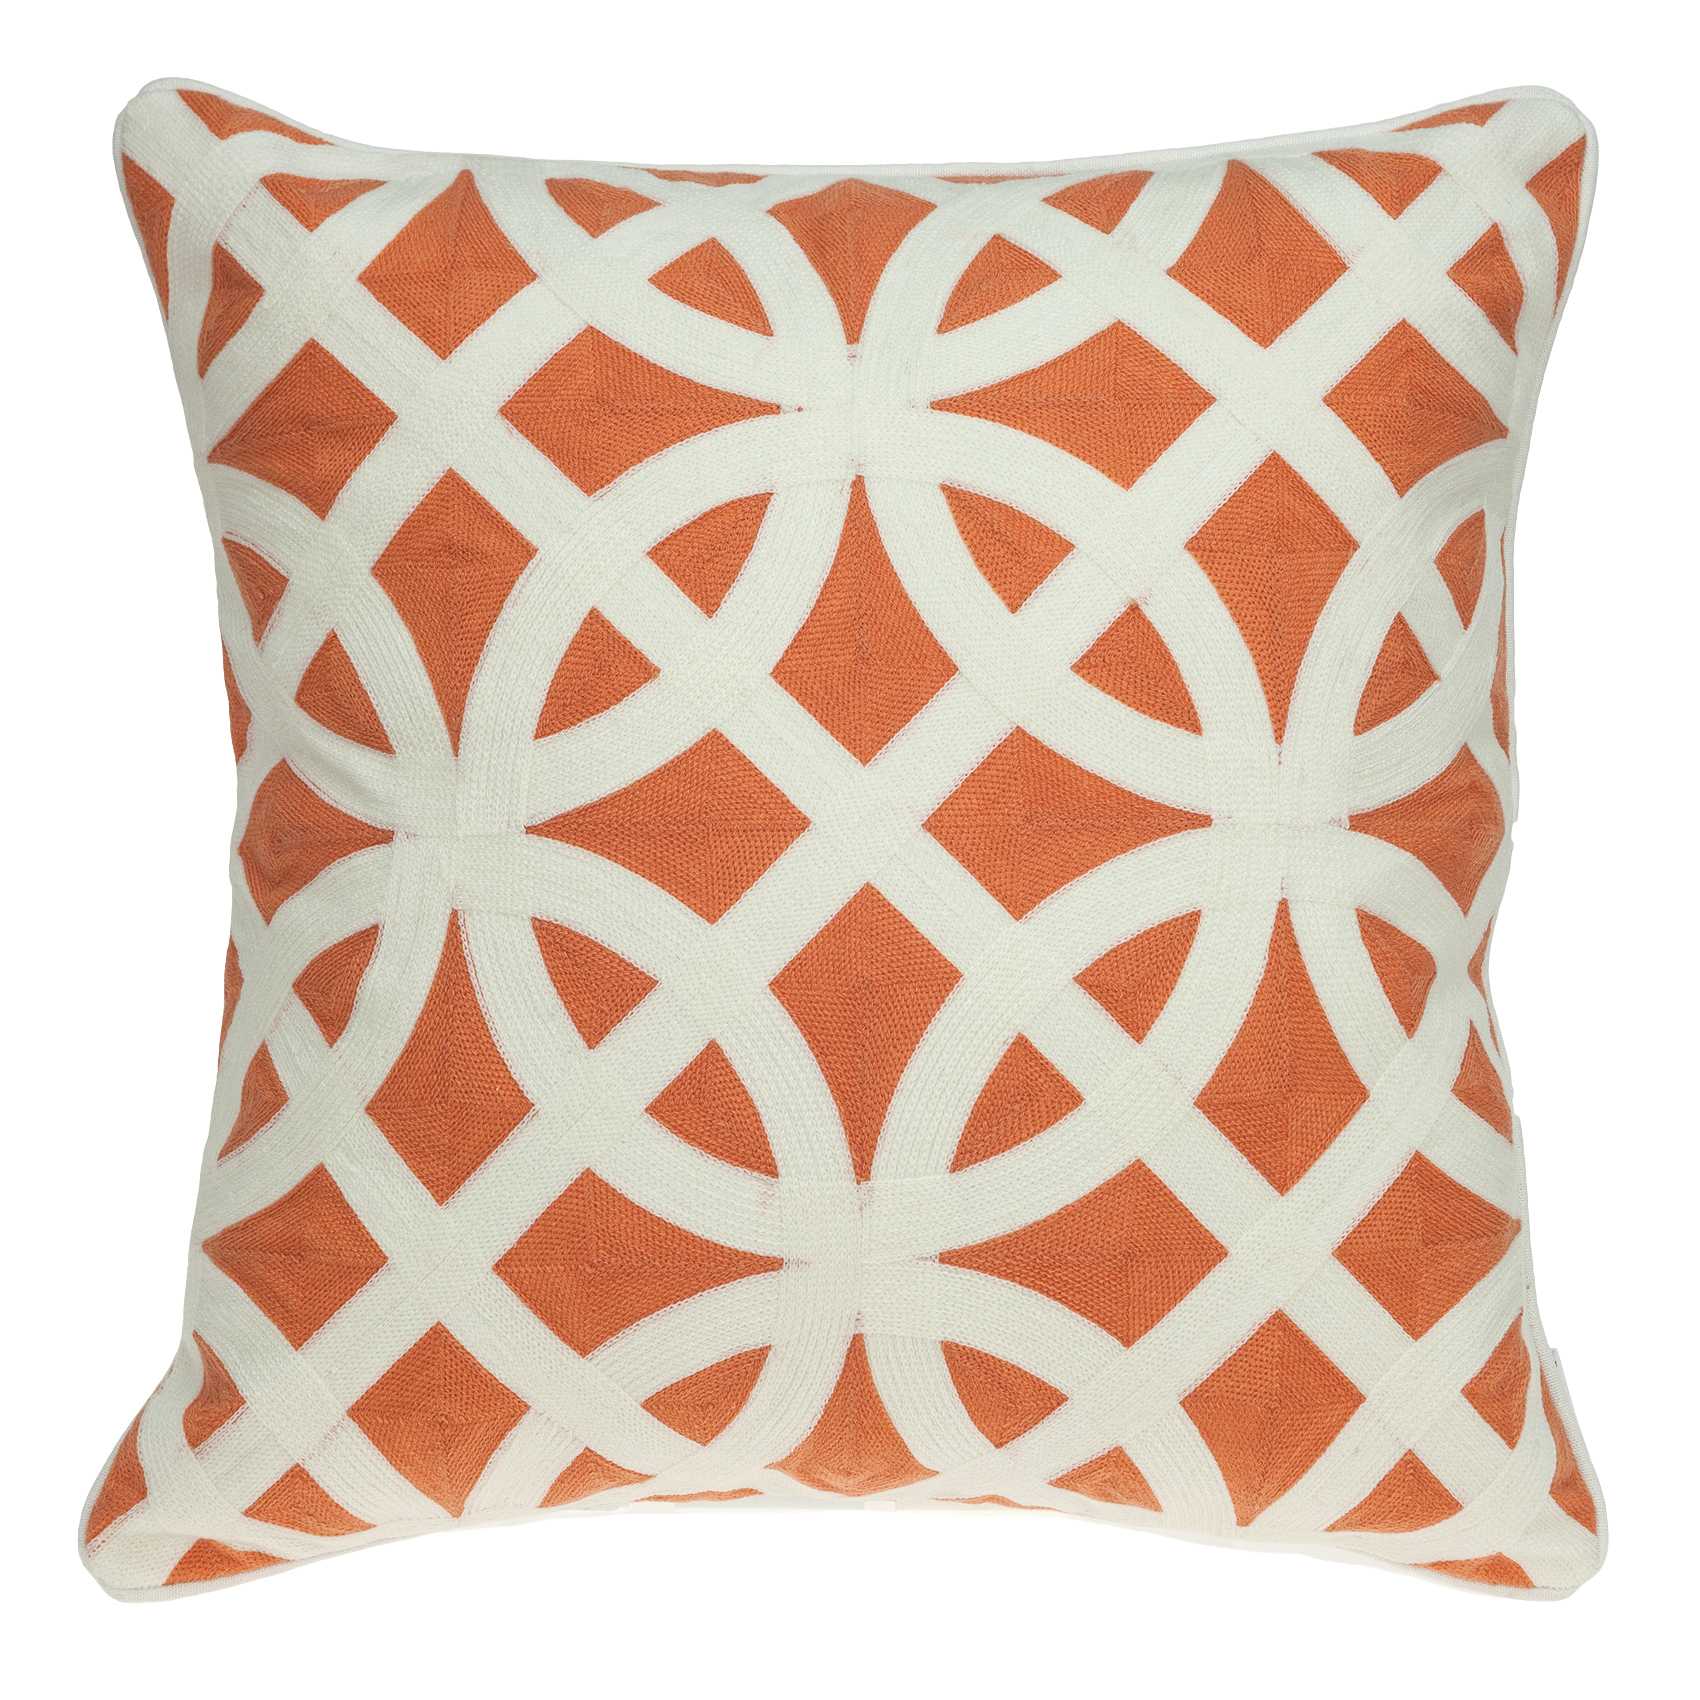 20" x 0.5" x 20" Transitional Orange And White Pillow Cover